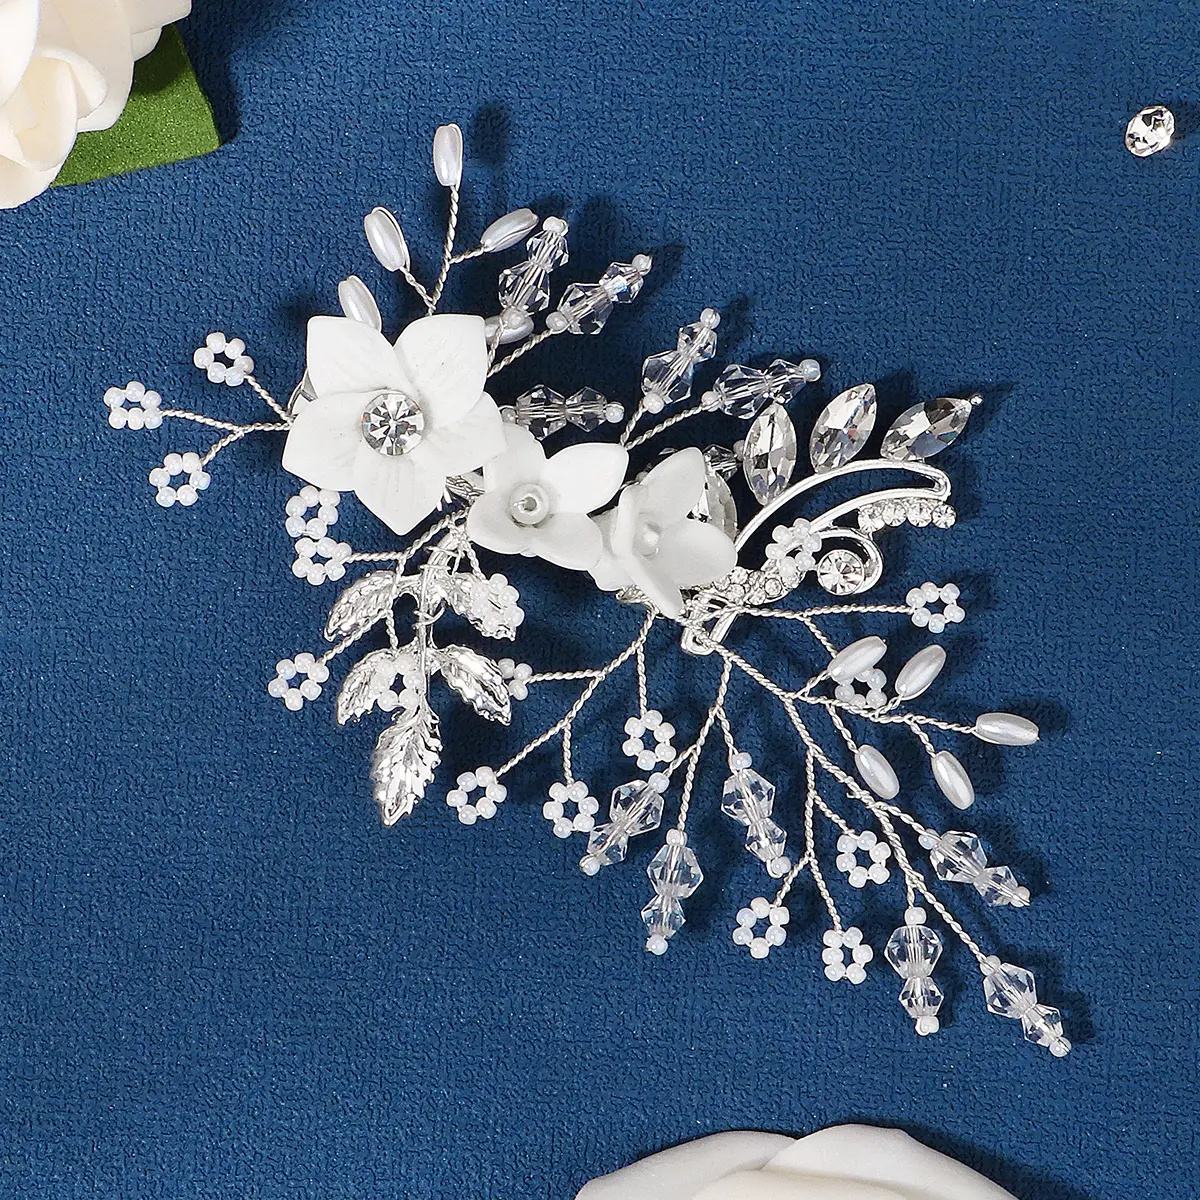 White Ceramic flowers Wedding Jewelry Bridal Hairpin hair clip Comb Accessories Bridesmaid Woman Party Use hair pieces headdress